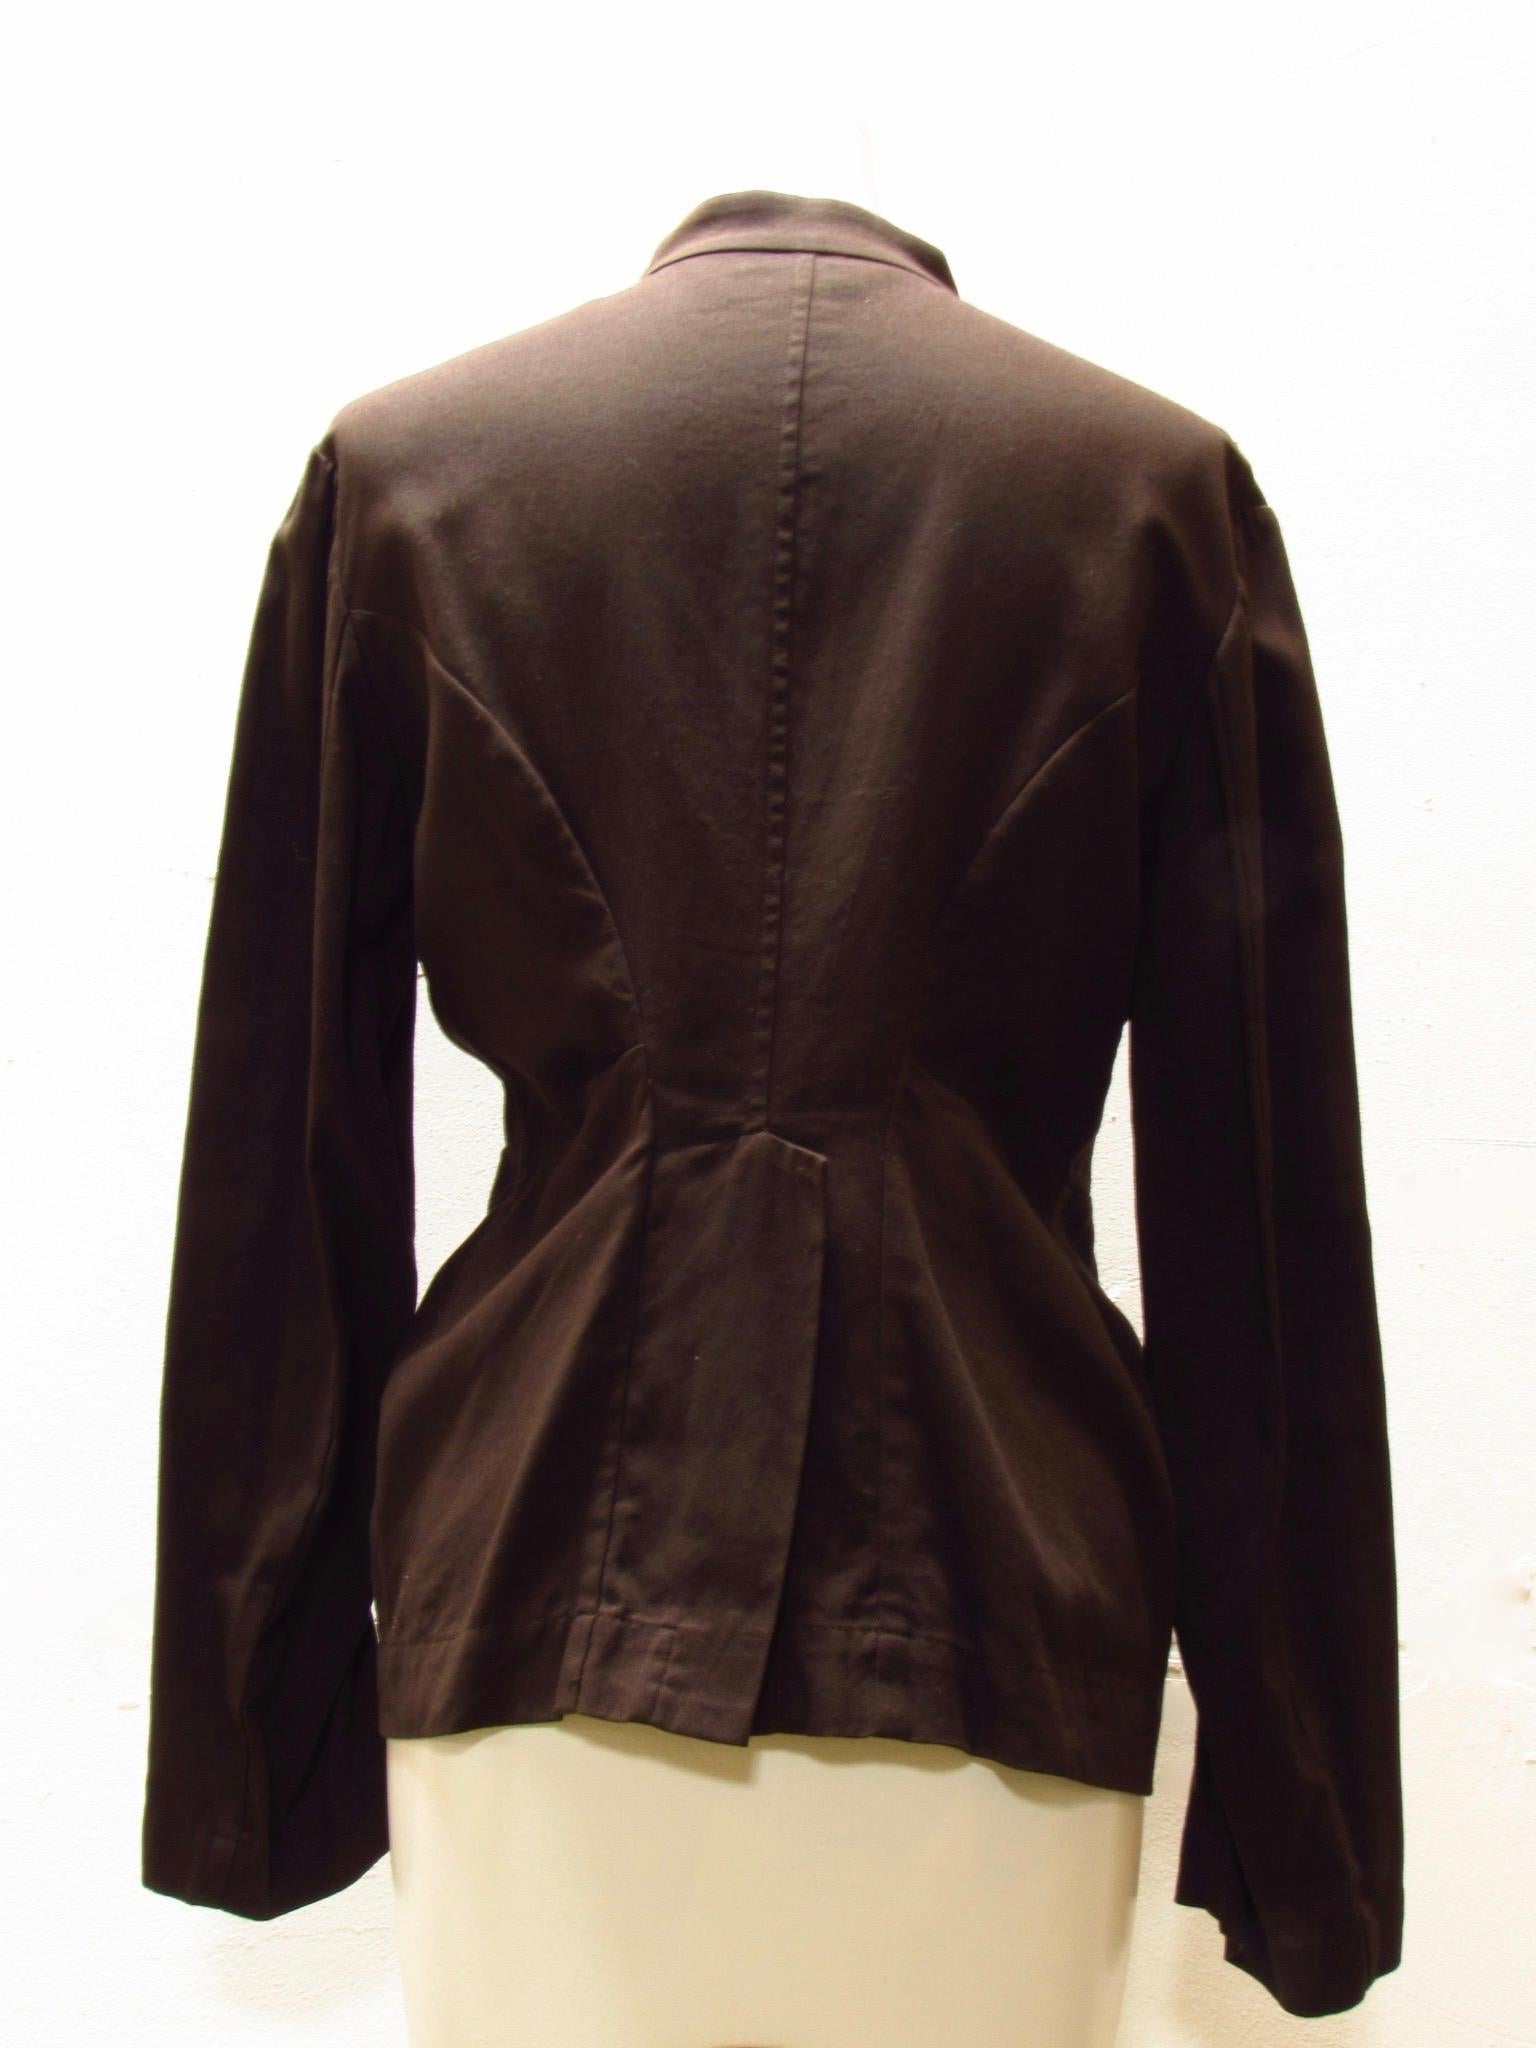 Y's Yohji Yamamoto Short Brown Lace Up Jacket For Sale 1